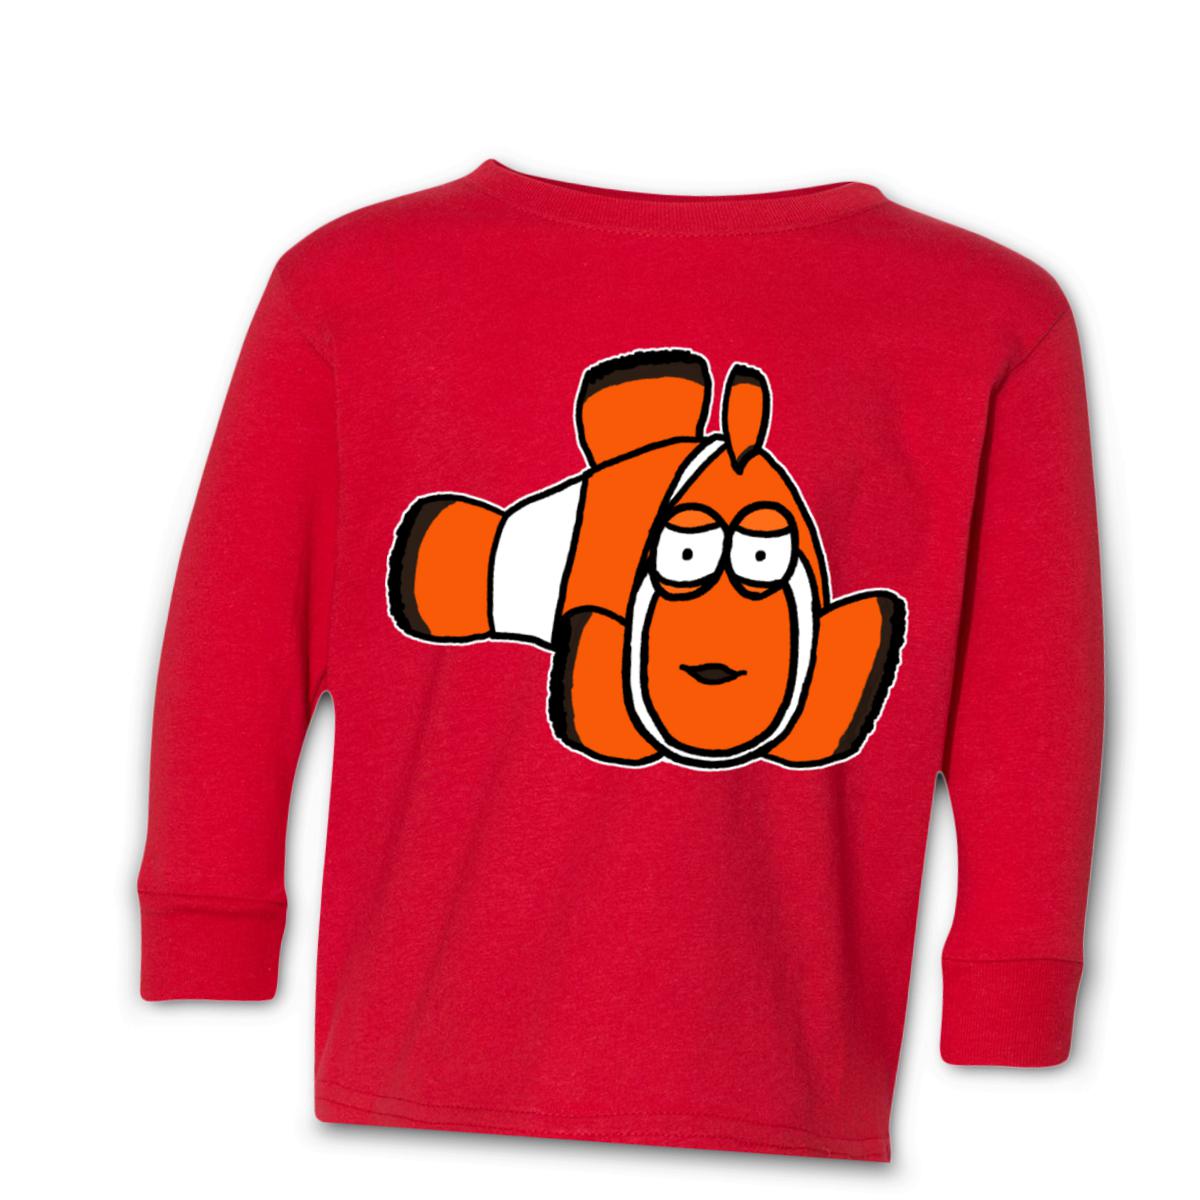 Clown Fish Toddler Long Sleeve Tee 56T red